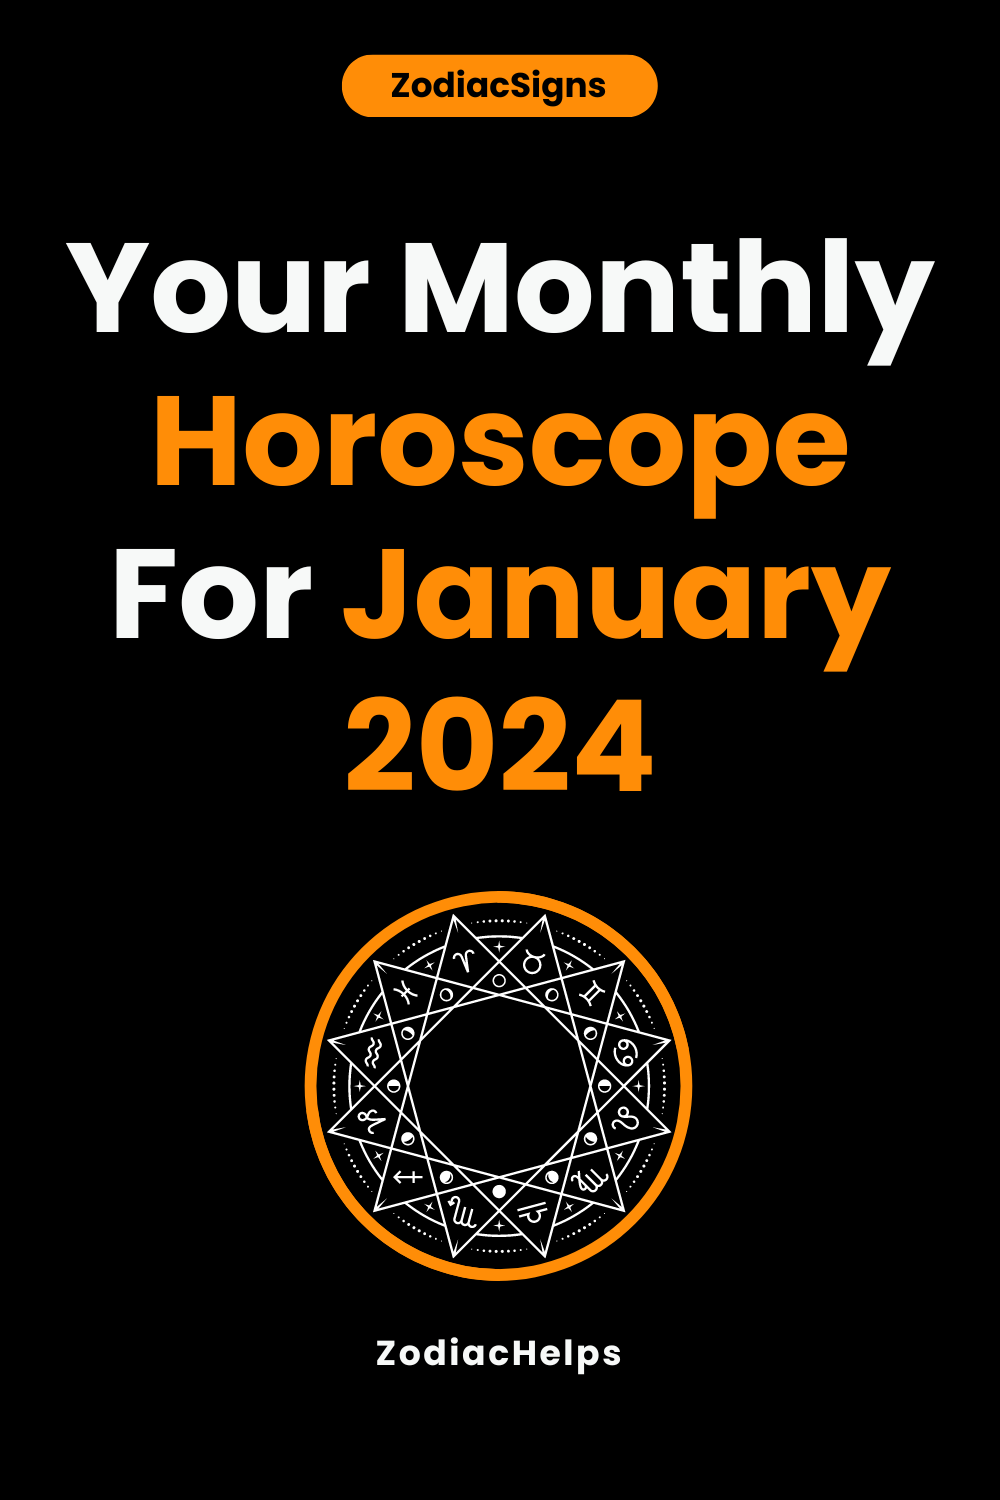 Your Monthly Horoscope For January 2024